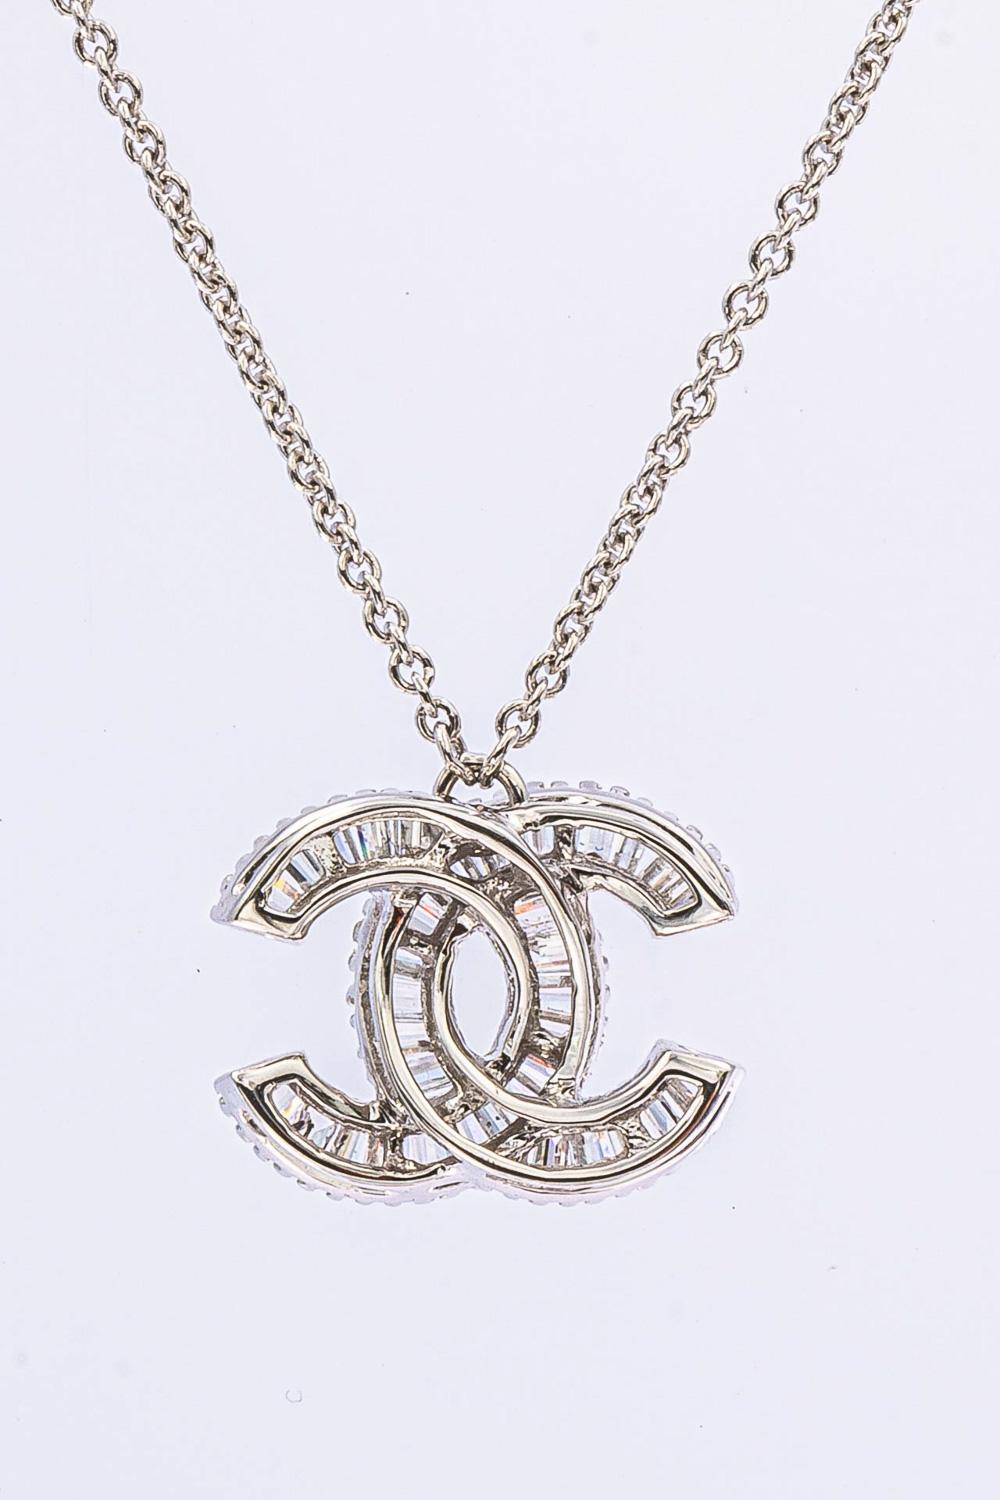 18CT White Gold Chanel Style Double C Diamond Pendant and Chain Thirty ...